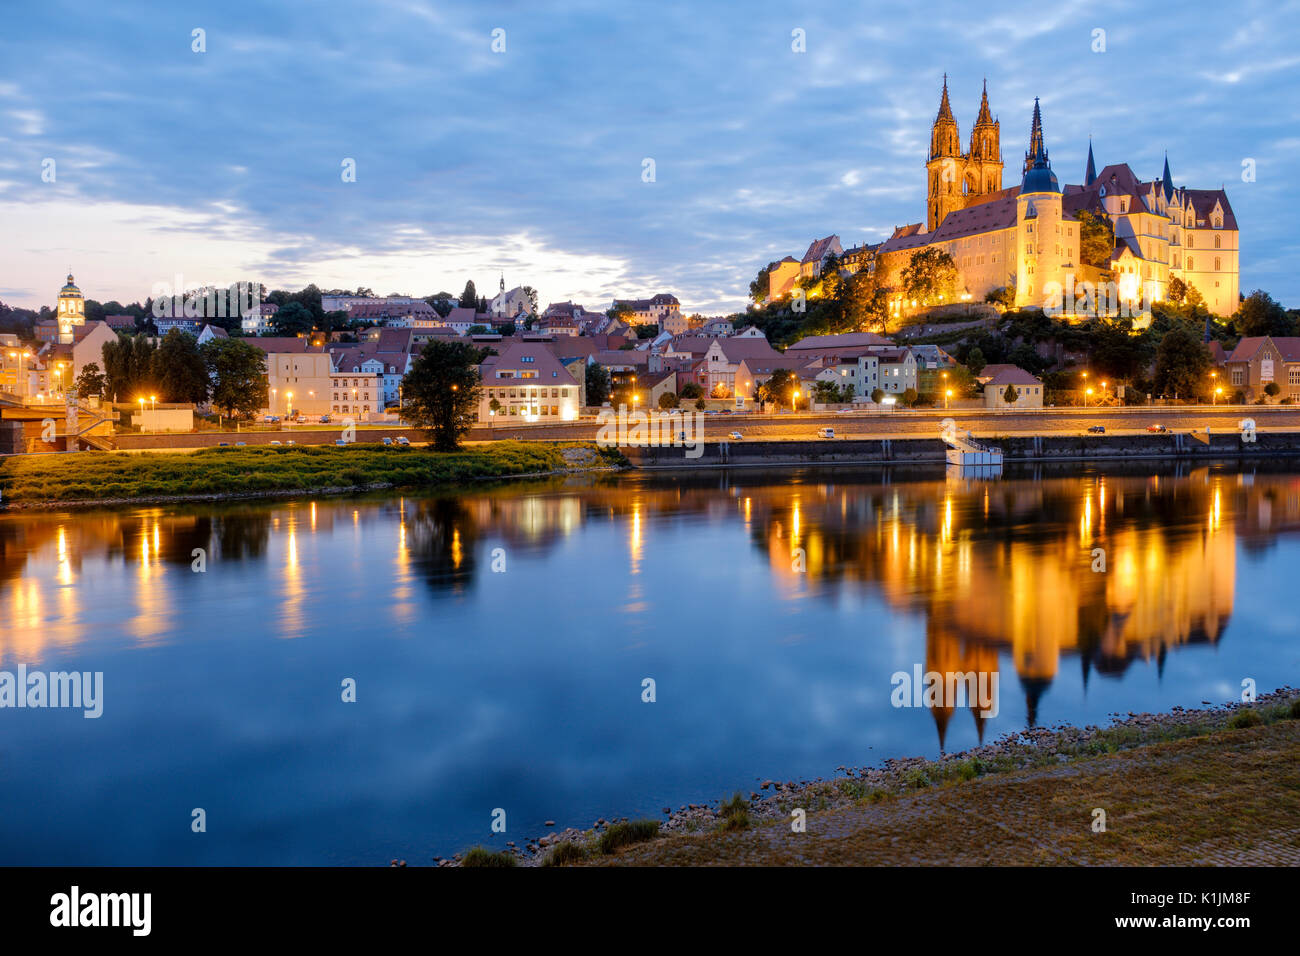 view over the Altstadt with the Albrechtsburg and River Elbe, Meissen, Saxony, Germany Stock Photo